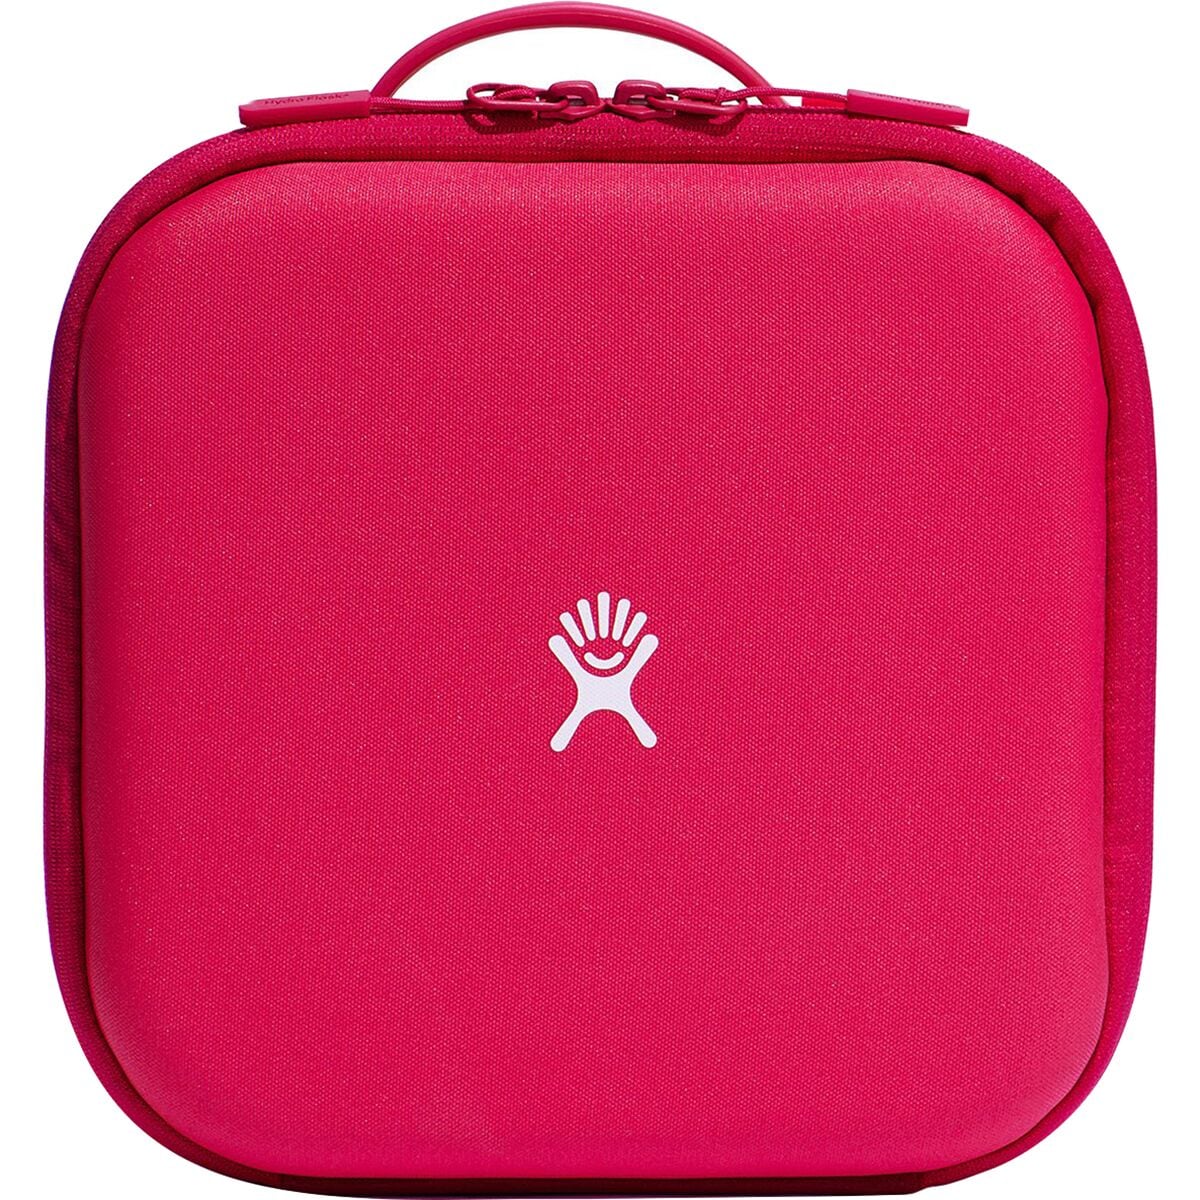 Hydro Flask Kids Insulated Lunch Box, Firefly / Small